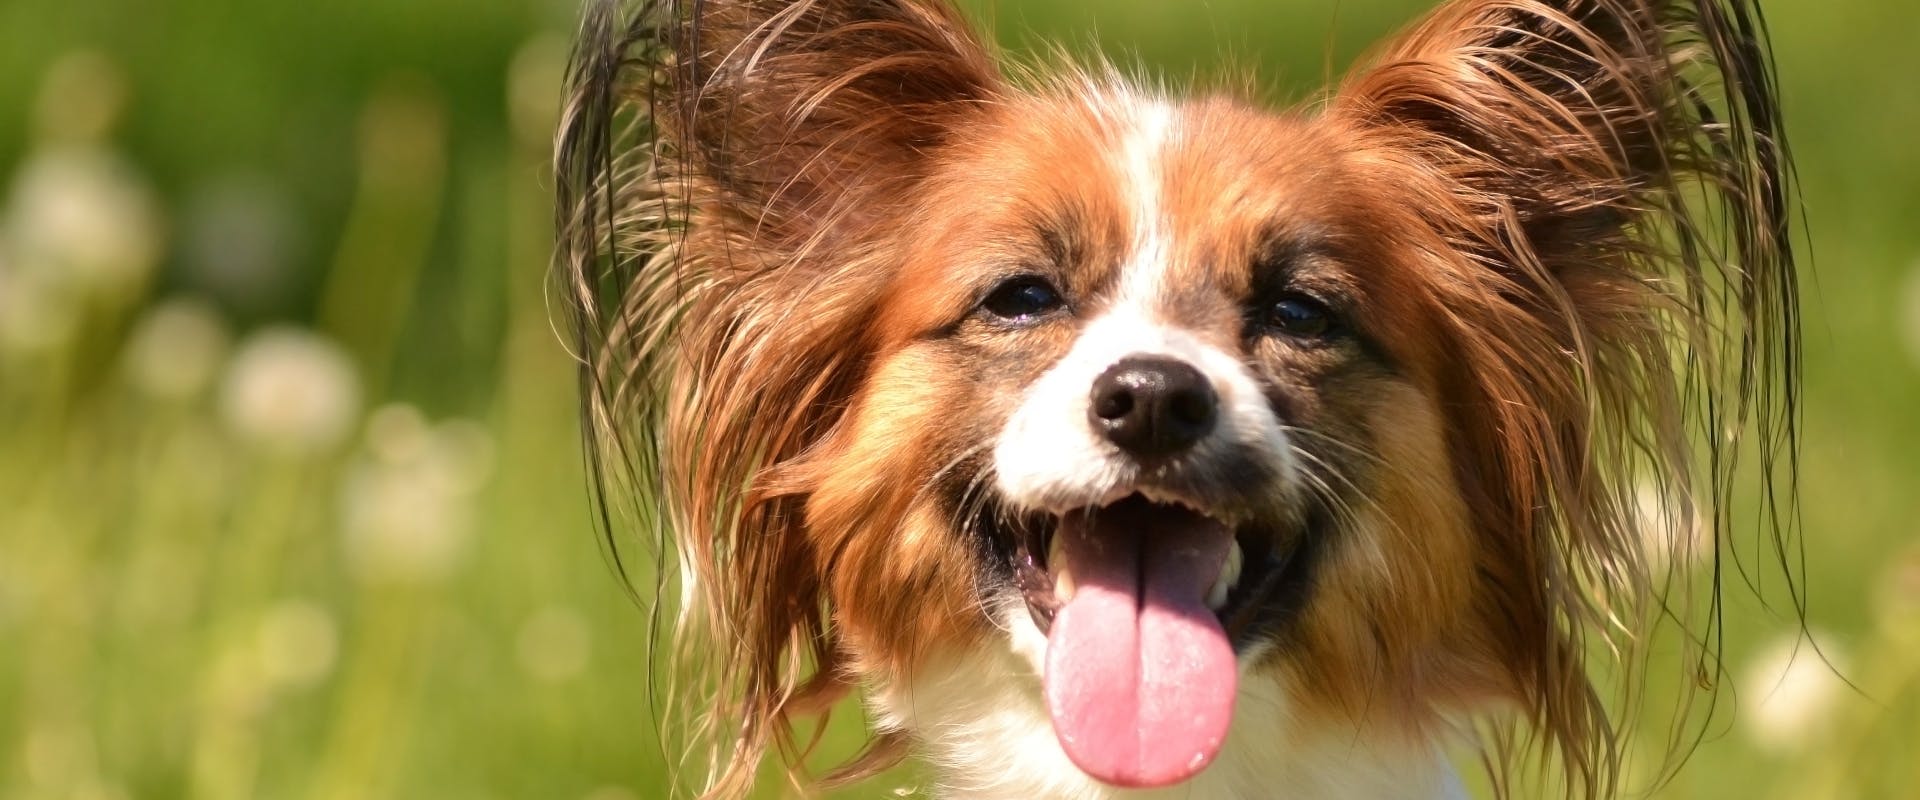 a Papillion dog sat in a field panting looking directly at the camera